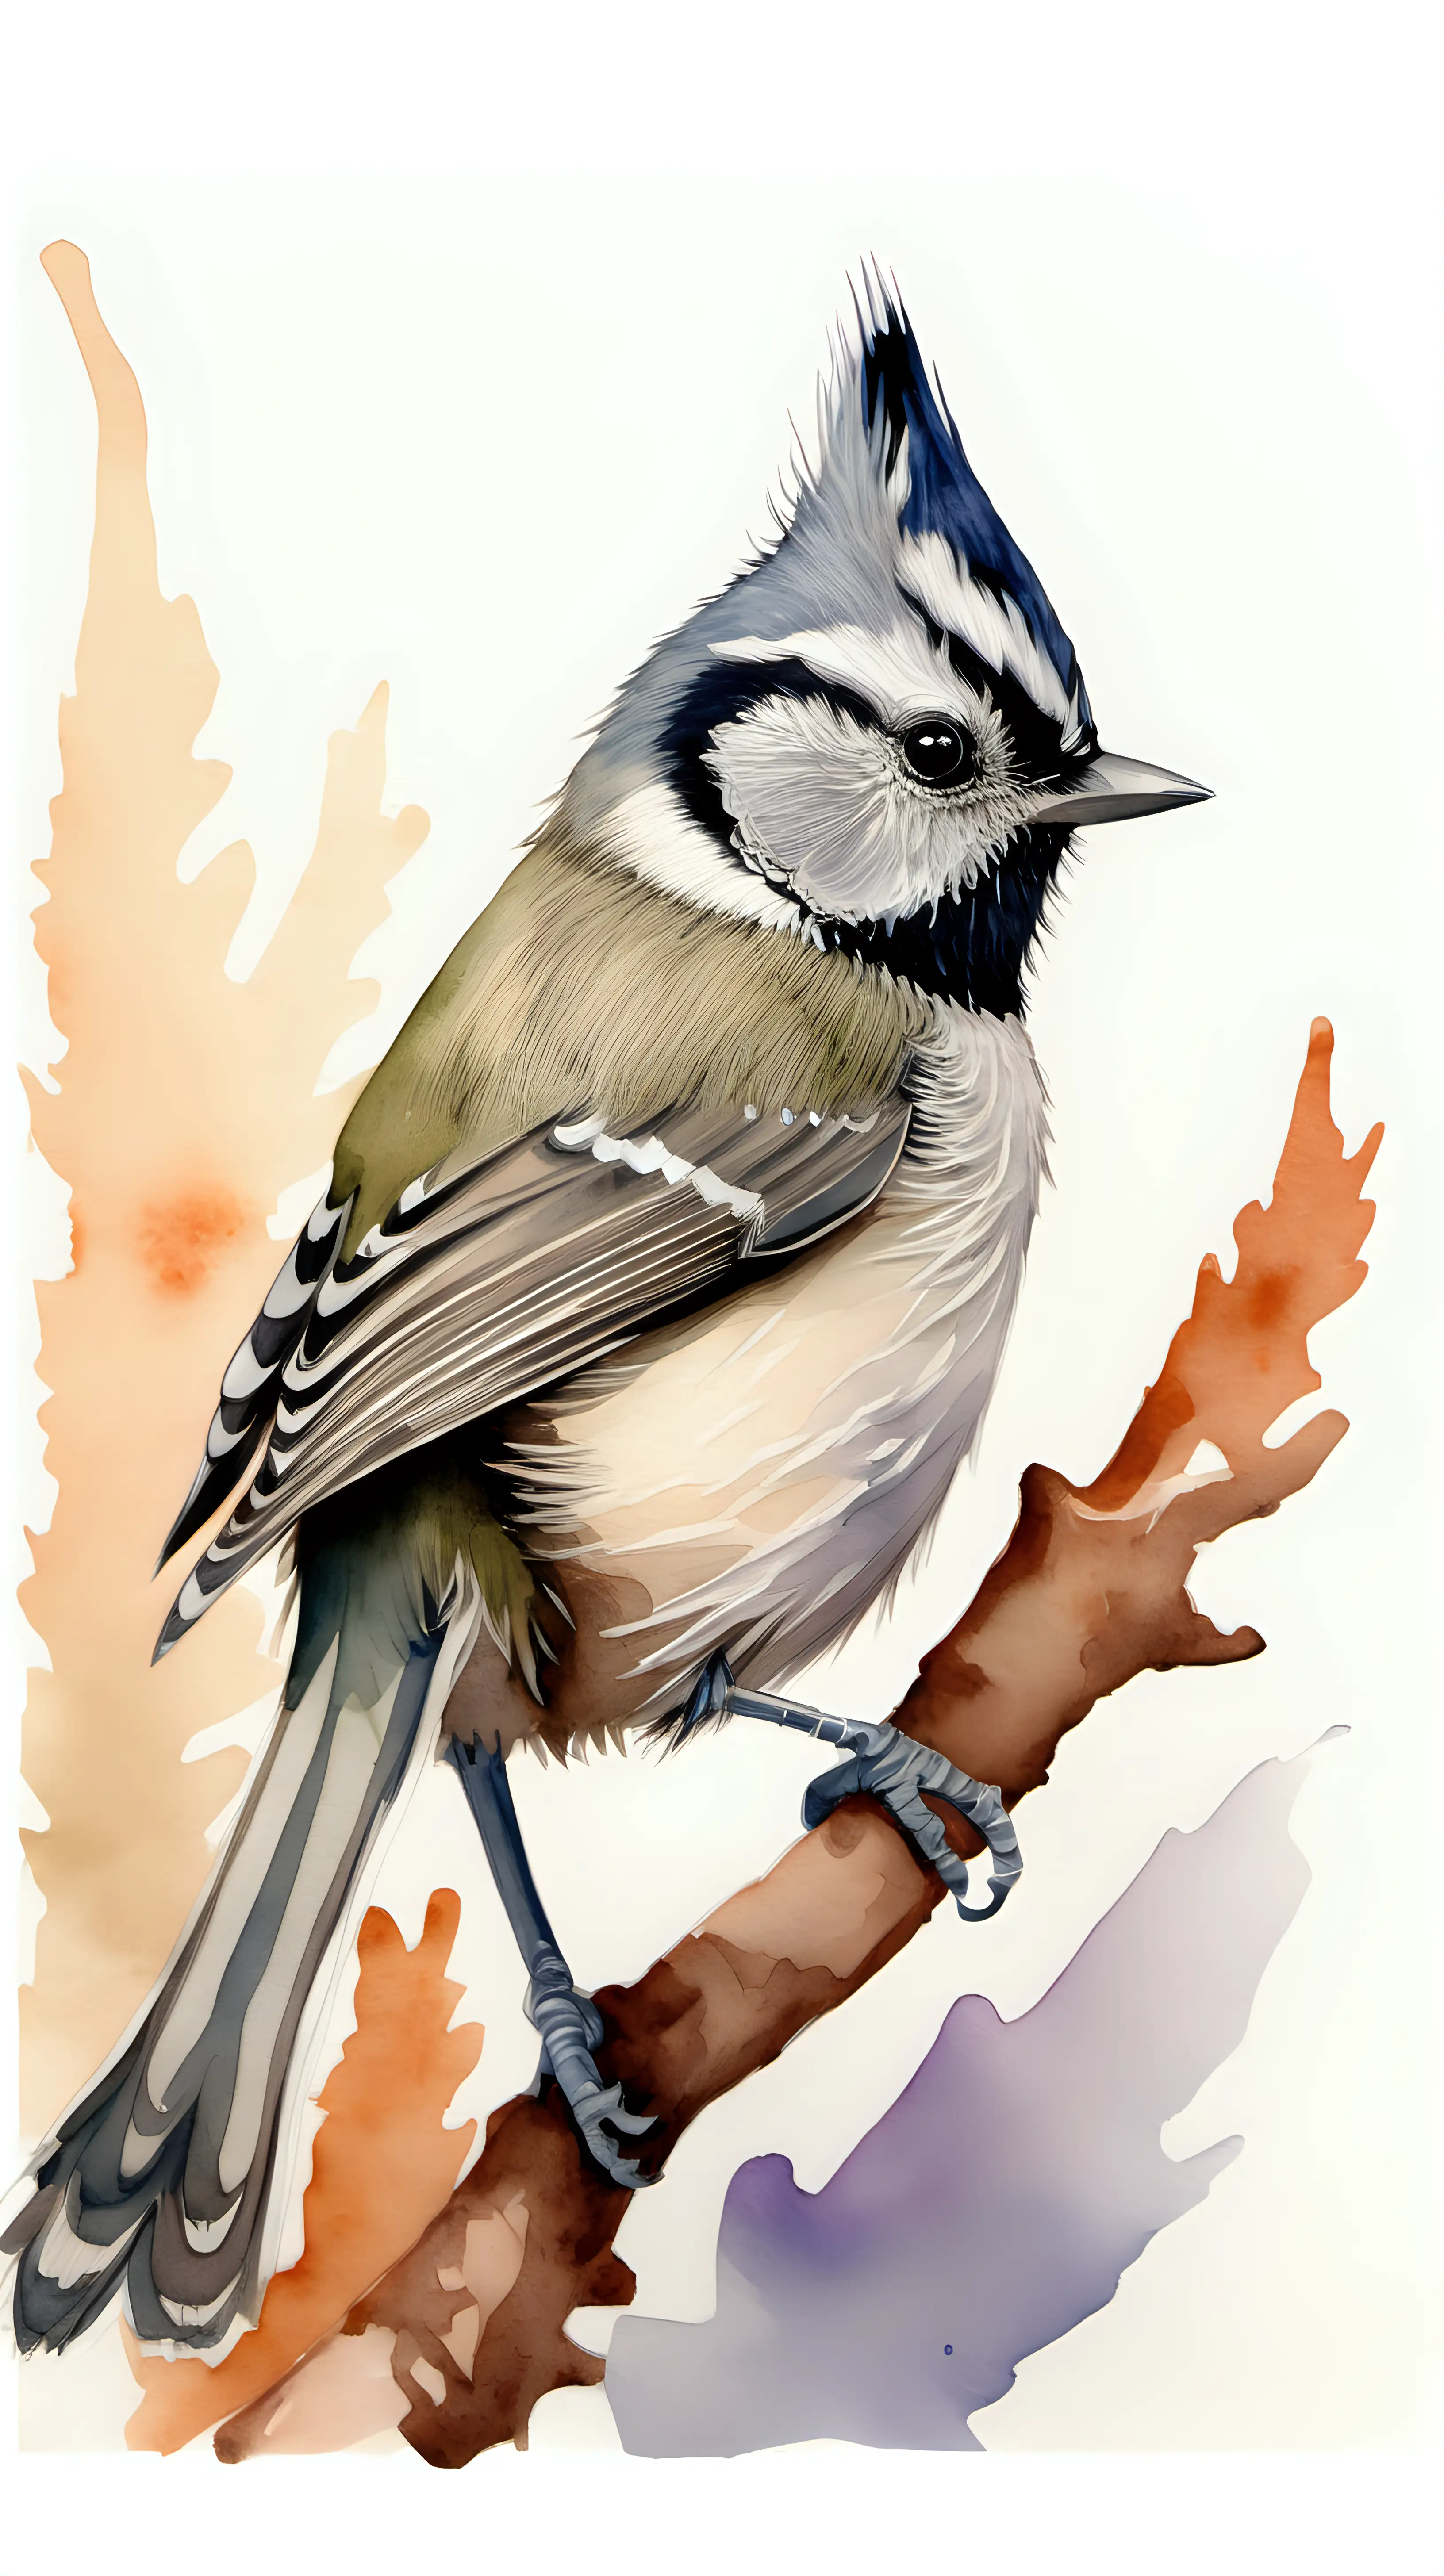 Generate as true to life as possible a Crested 
Tit bird in watercolor